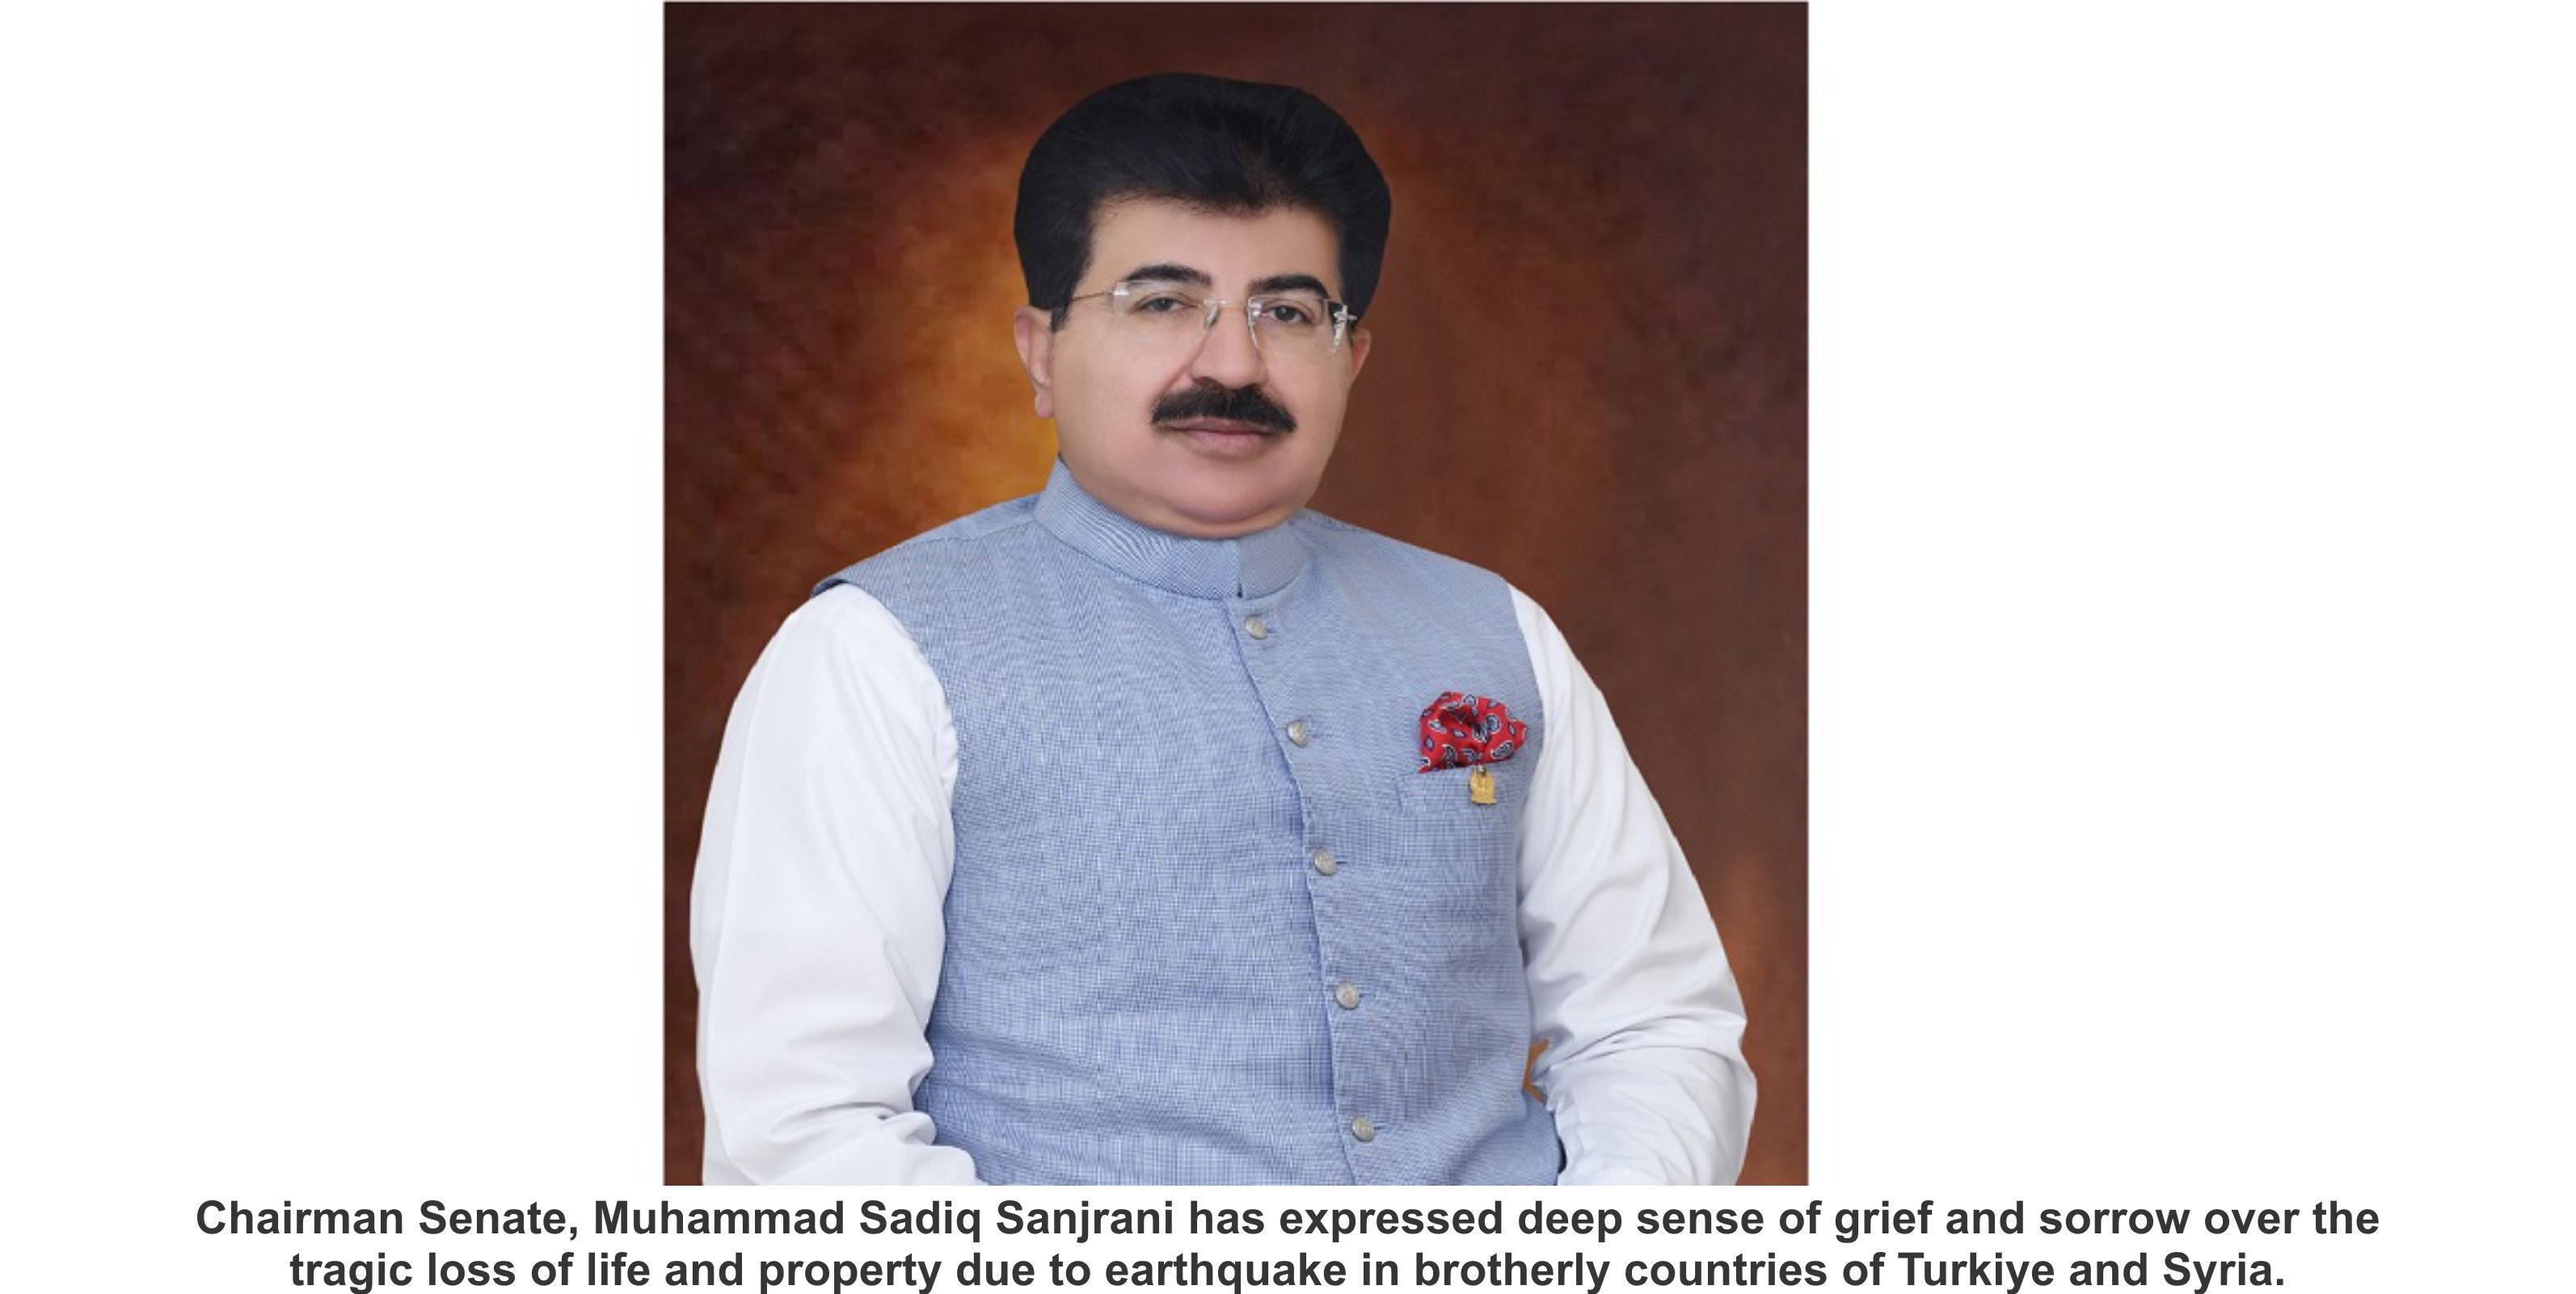 Chairman Senate, Muhammad Sadiq Sanjrani has expressed deep sense of grief and sorrow over the tragic loss of life and property due to earthquake in brotherly countries of Turkiye and Syria.